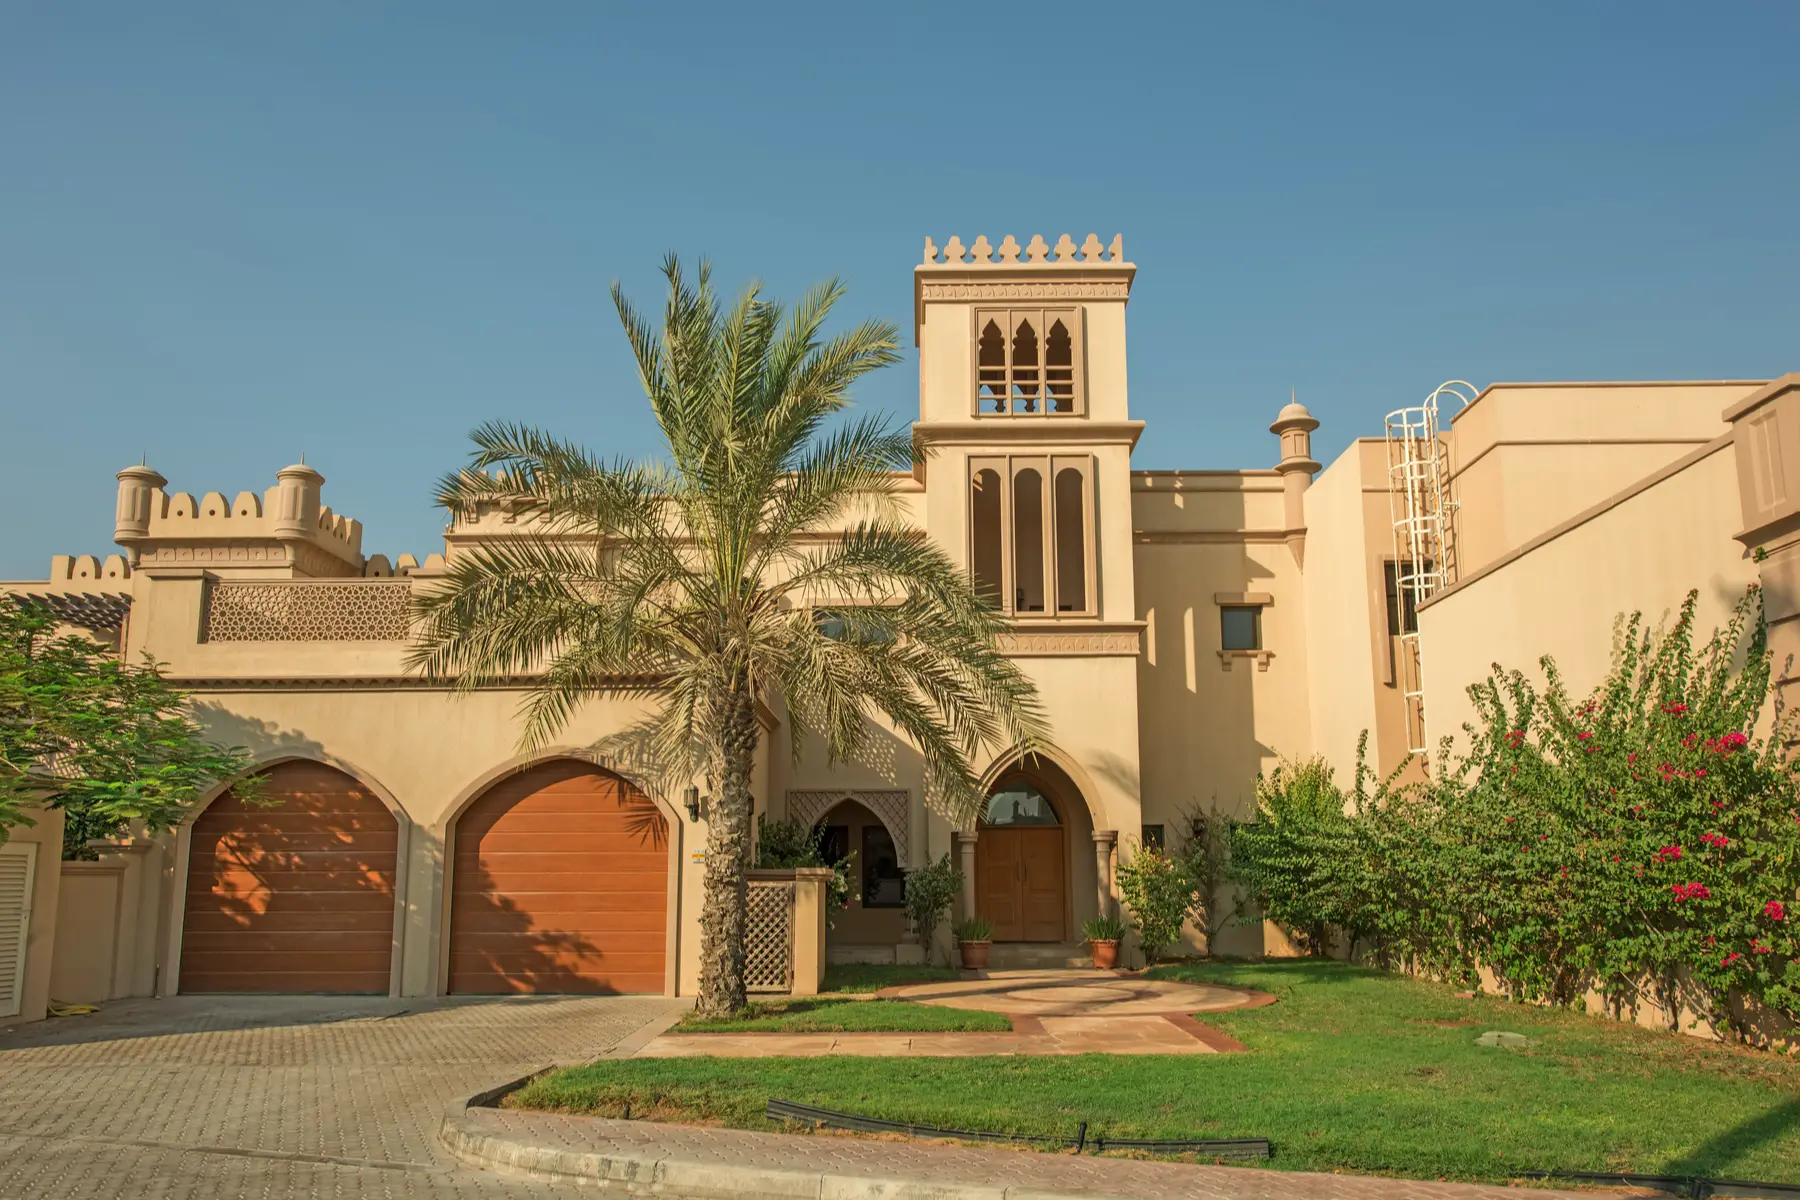 Typical villa in the UAE